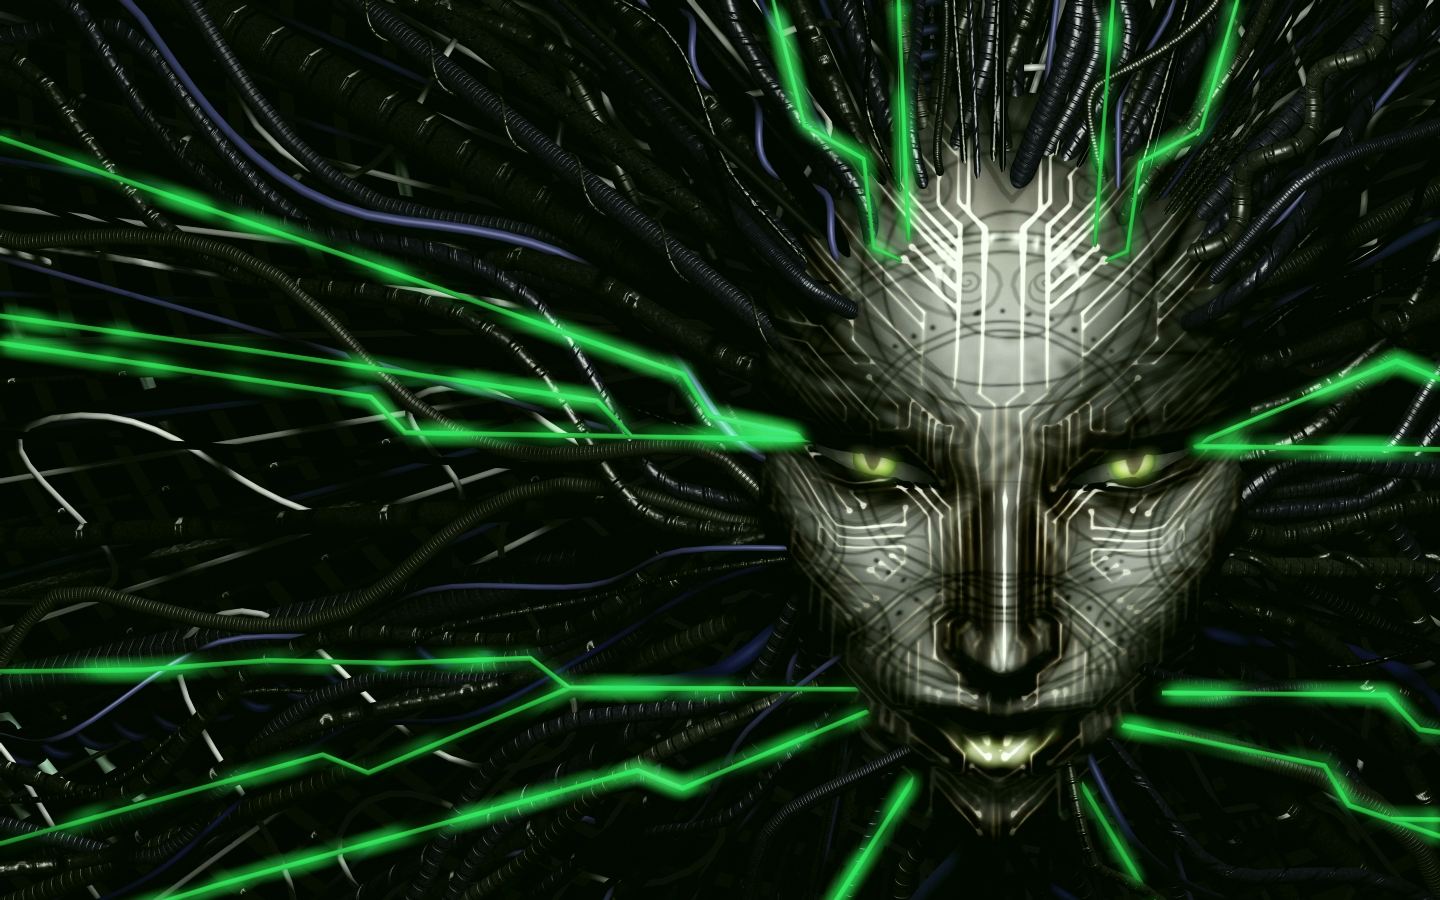 System Shock Wallpaper And Background Image Shodan